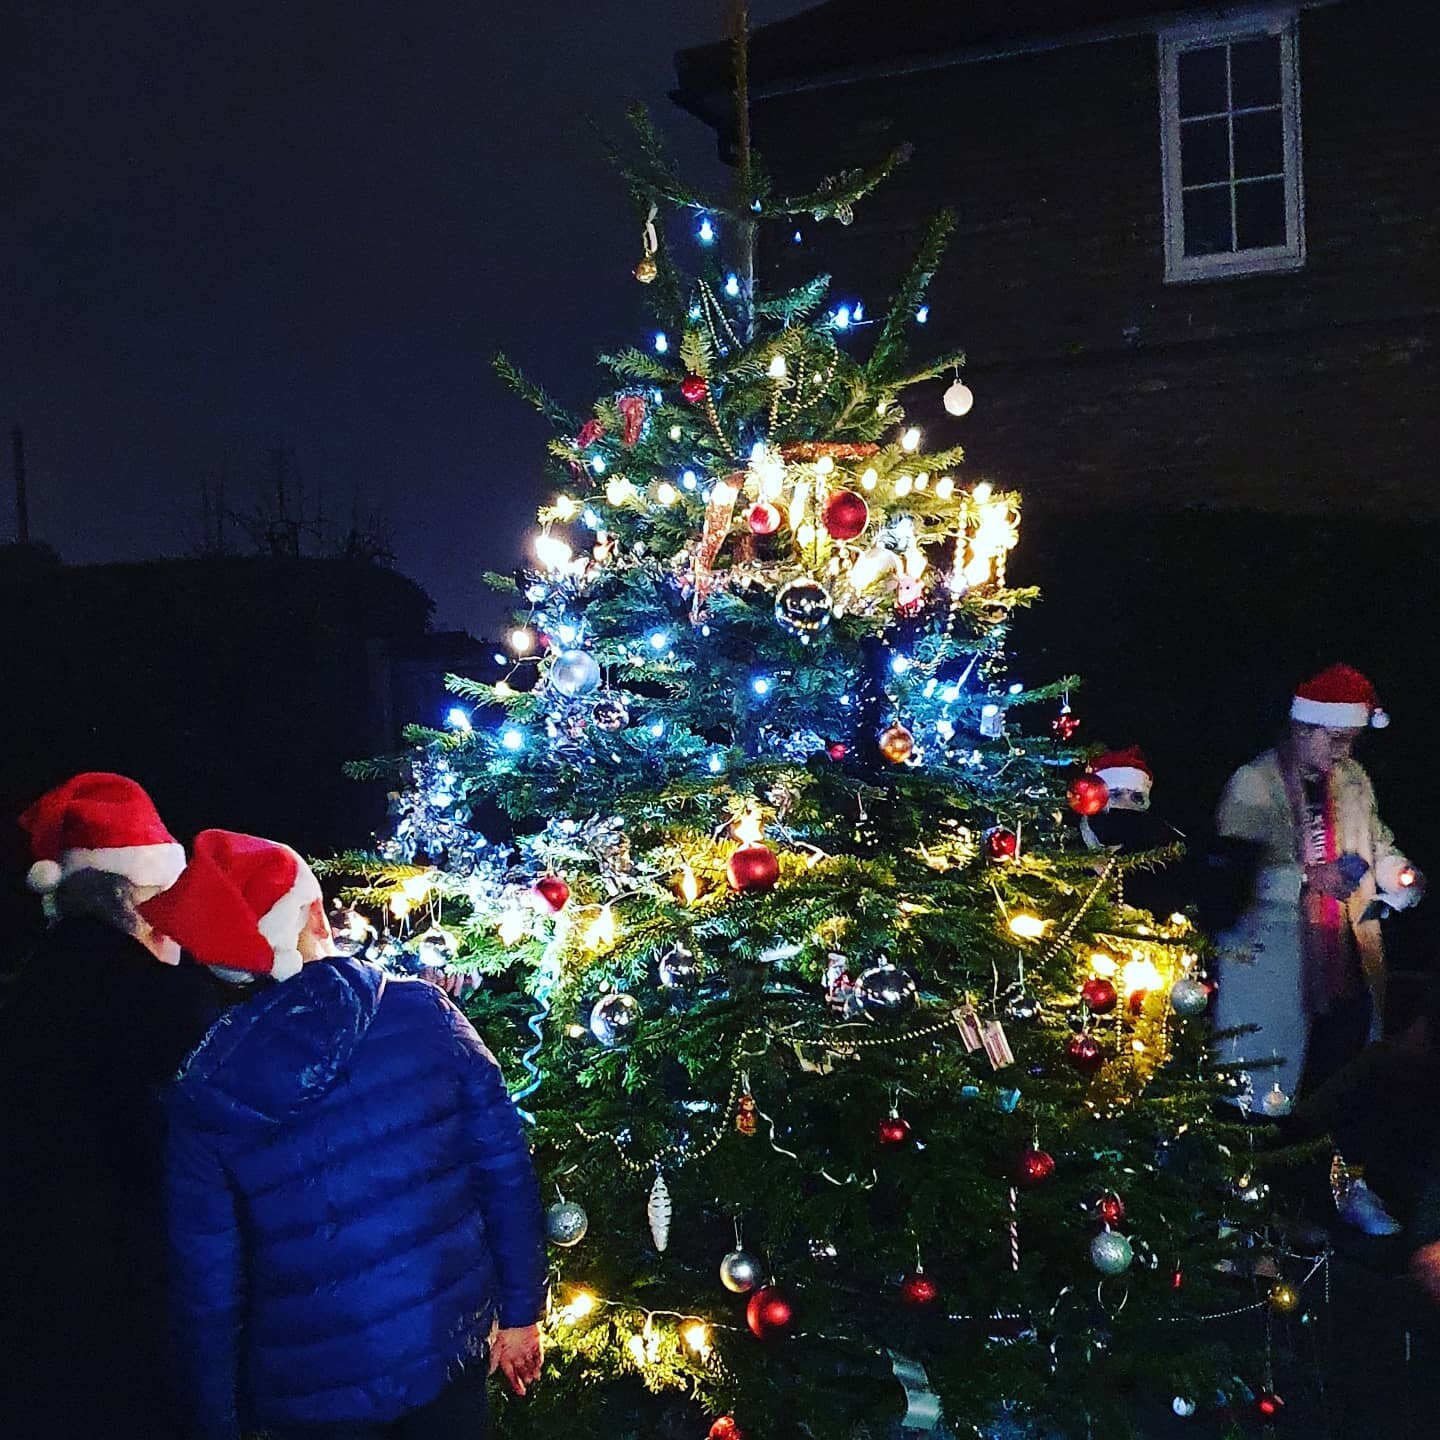 Lights on the @thegreenprojectsb Christmas tree on the corner of Sawley and Bloemfontein roads #christmascheer #christmastree #christmaslights #communitygarden